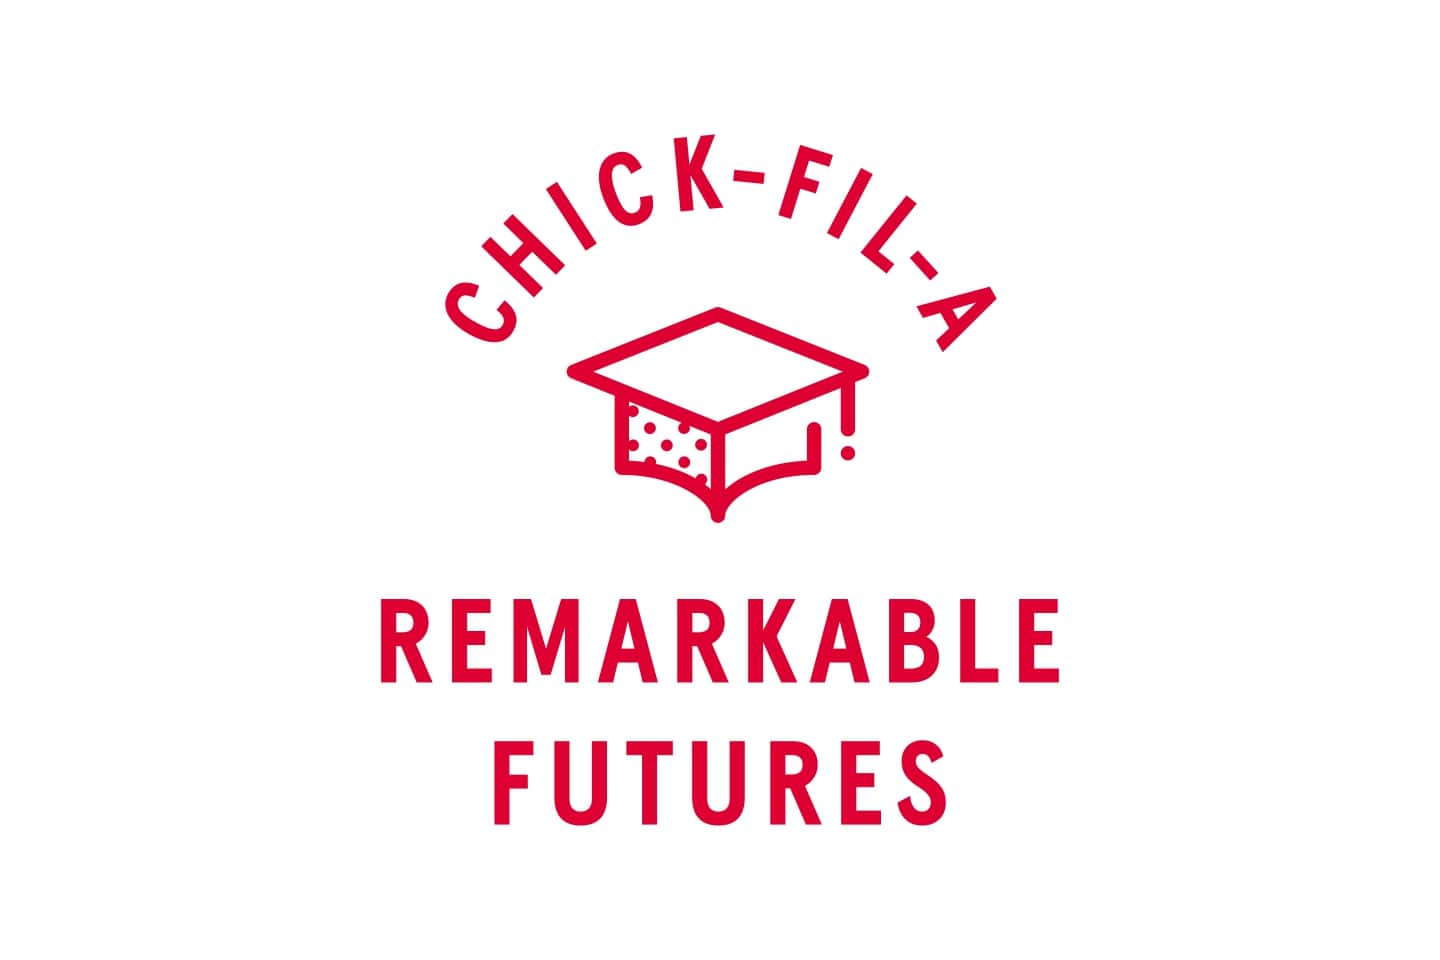 The Remarkable Futures logo.